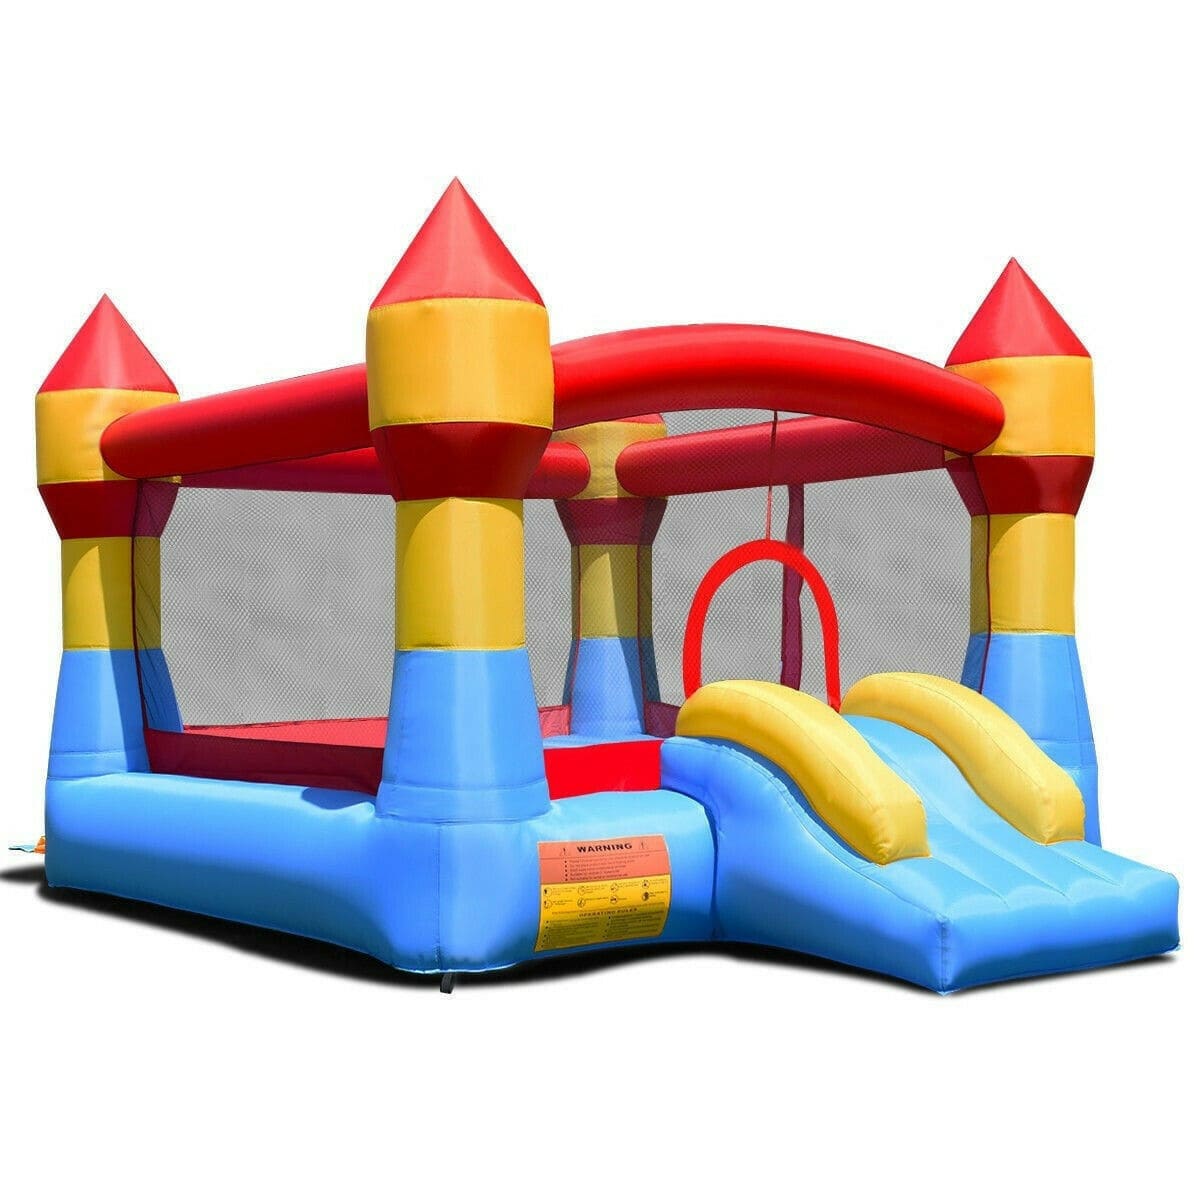 Inflatable Bounce House - Kids Inflatable Playhouse Trampoline -  Blow Up Bounce House for Kids with Blower - EZInflatable  Castle